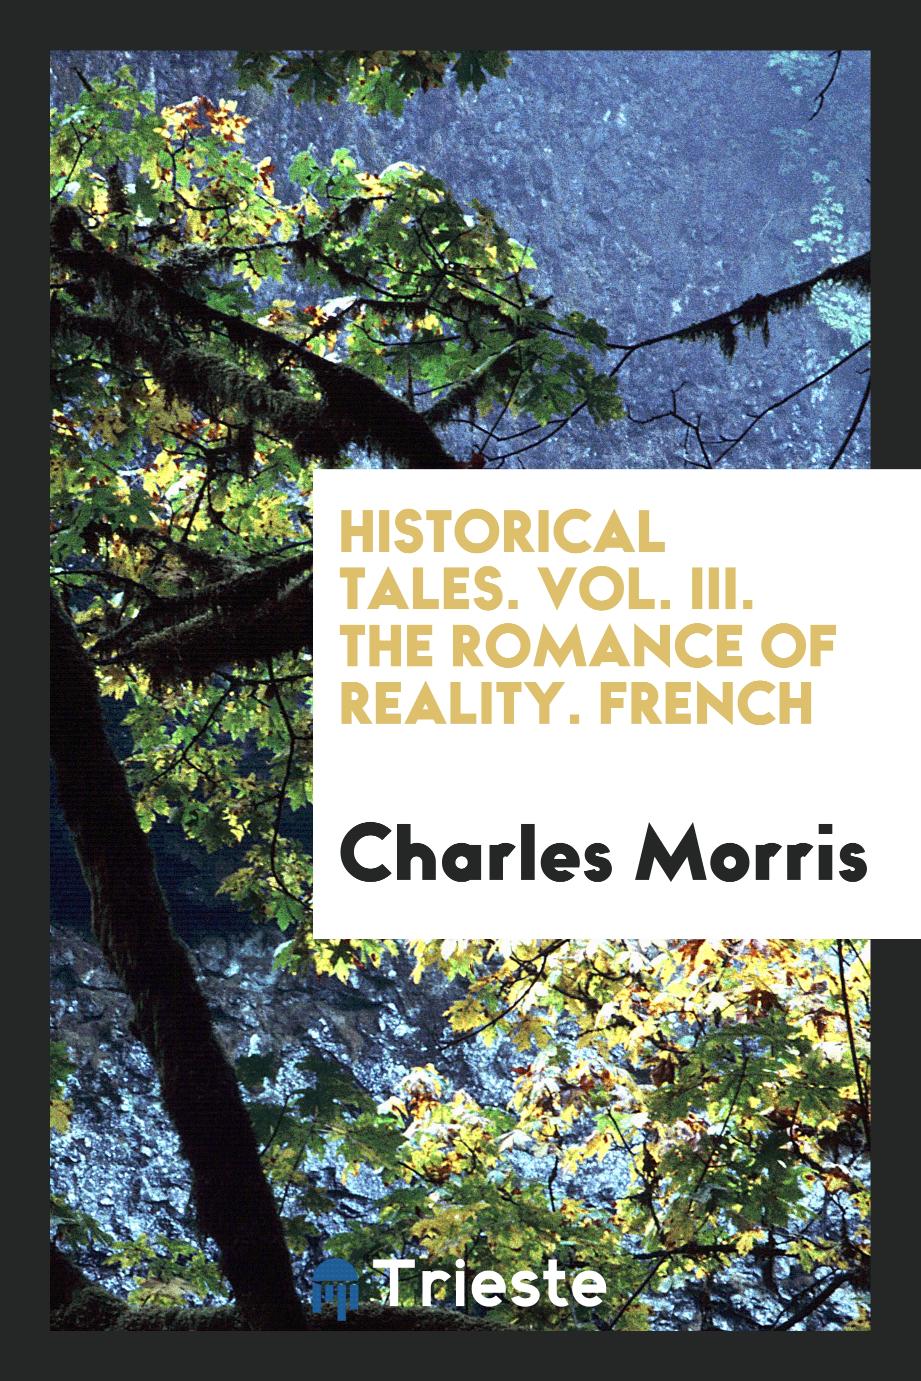 Historical Tales. Vol. III. The Romance of Reality. French